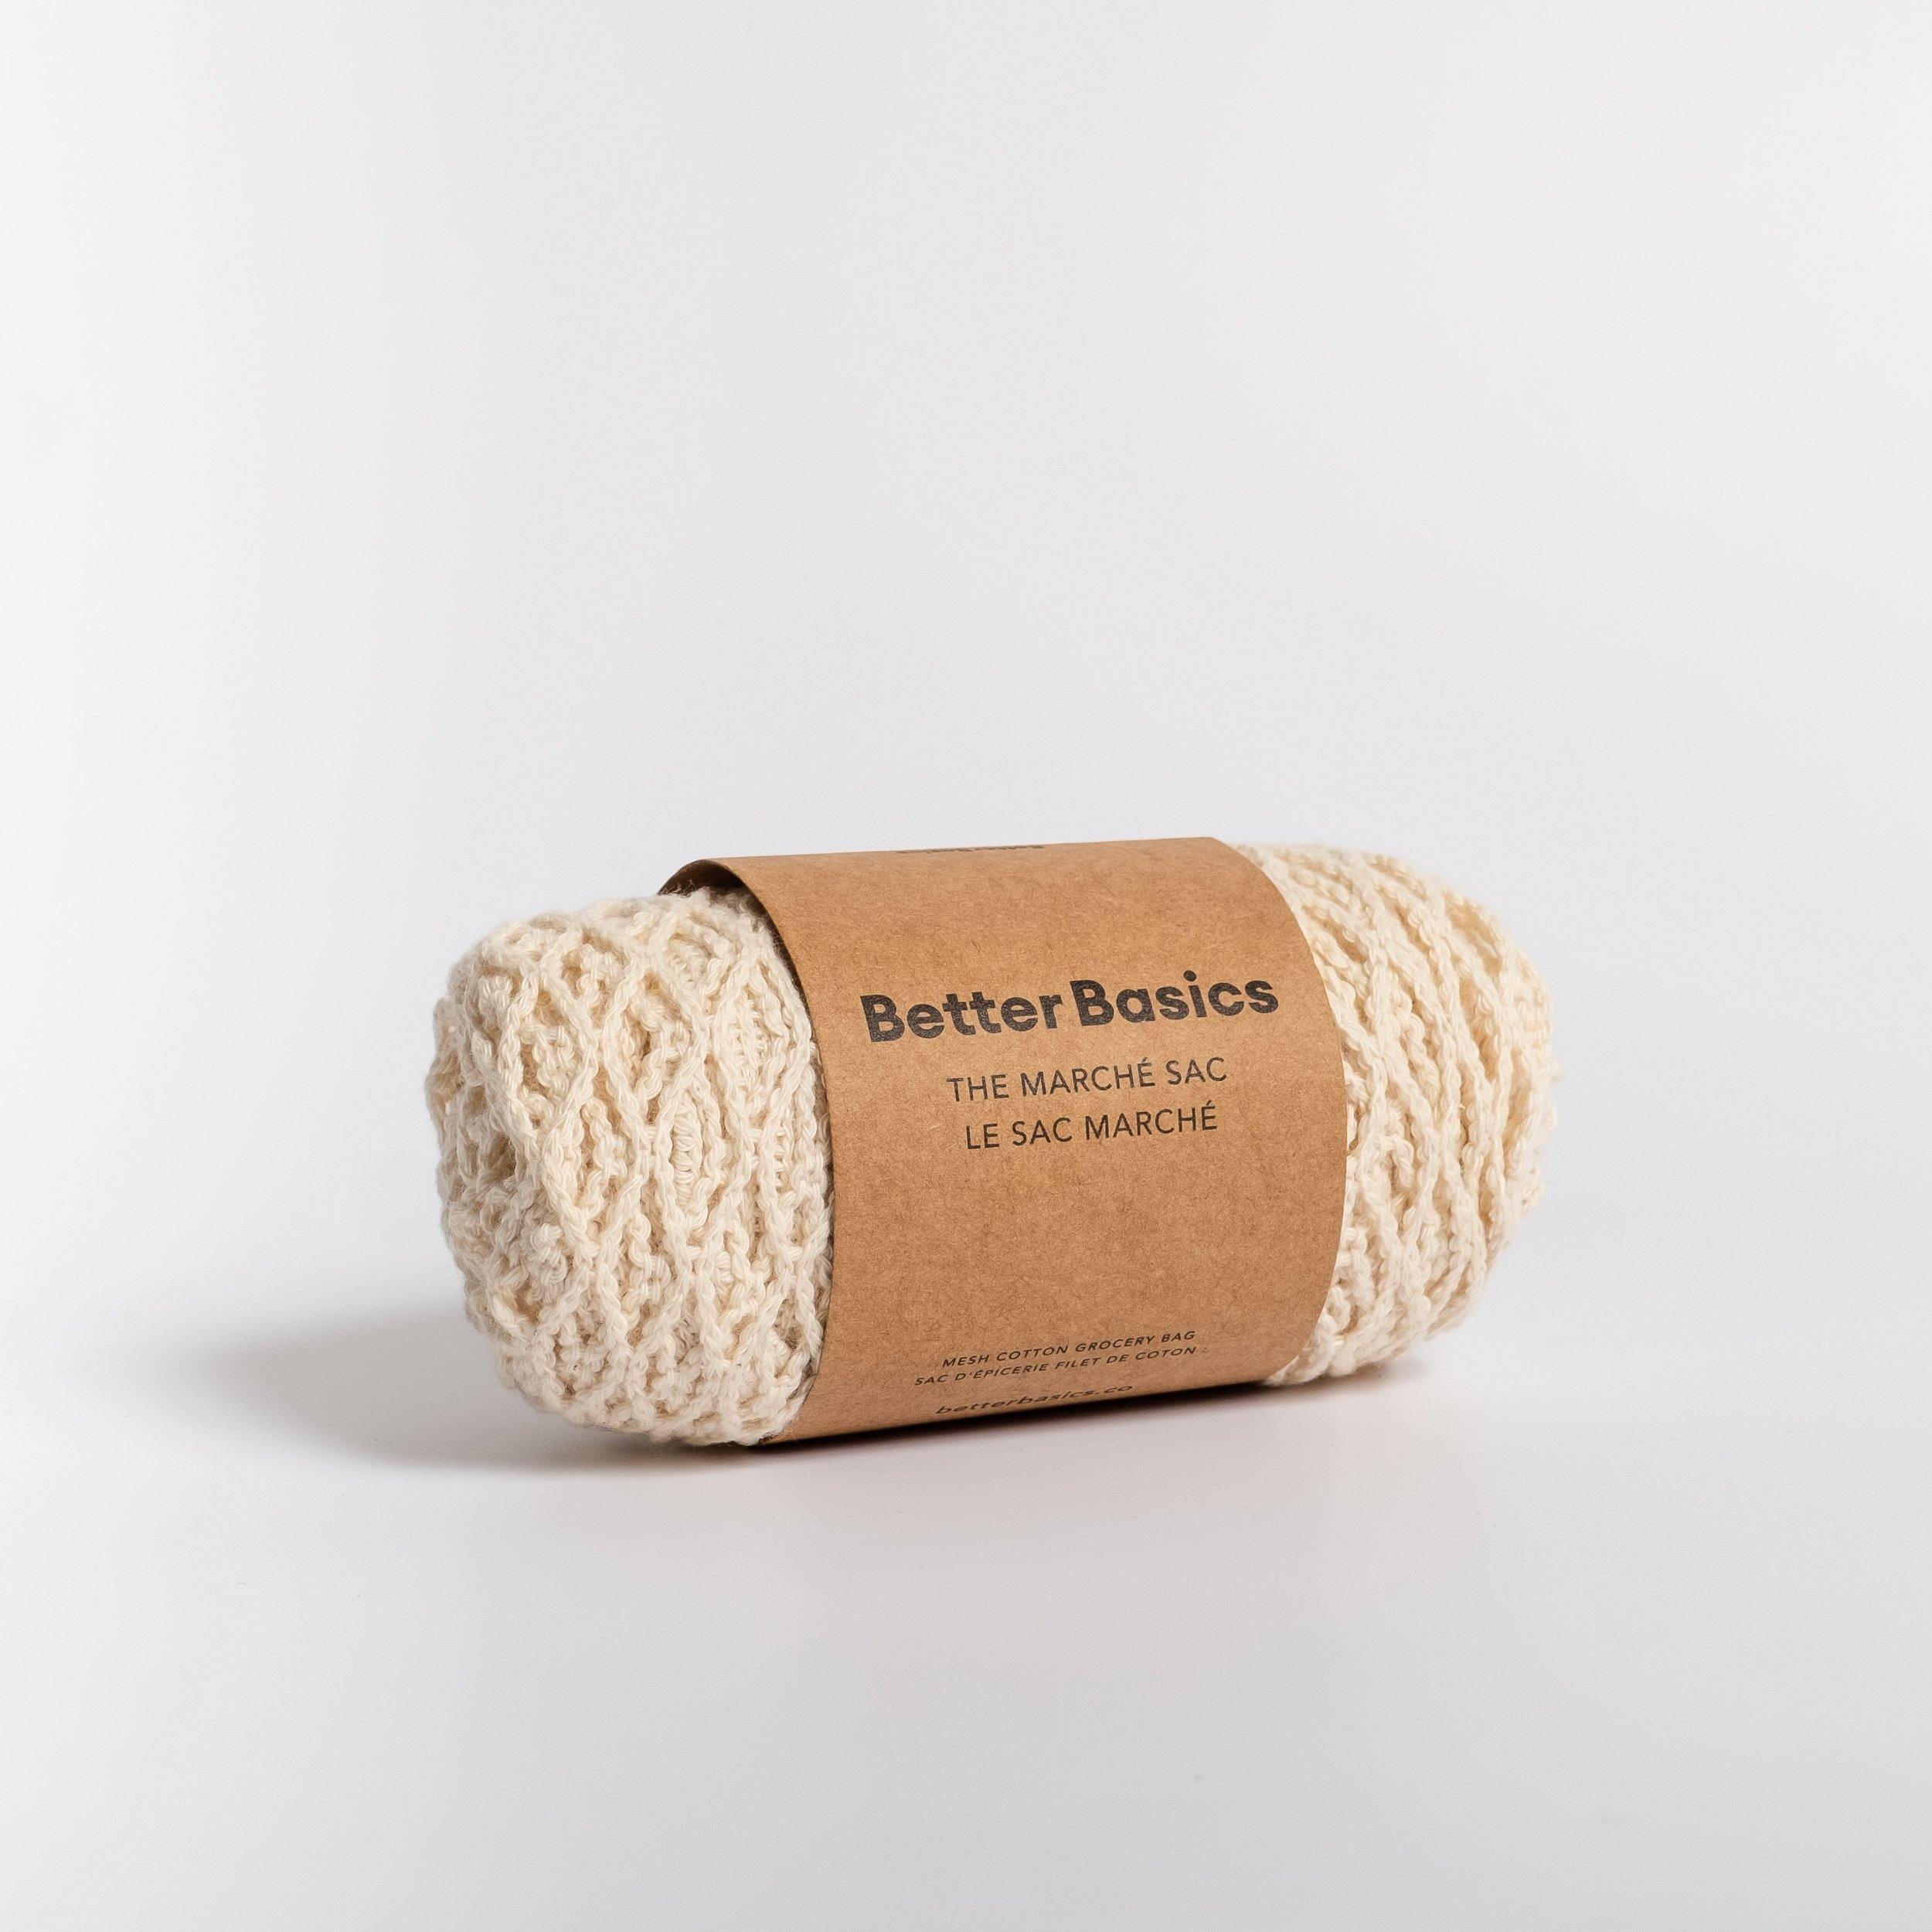 The Marche Sac - Bag - Better Basics Eco-Friendly Products - Vancouver Canada